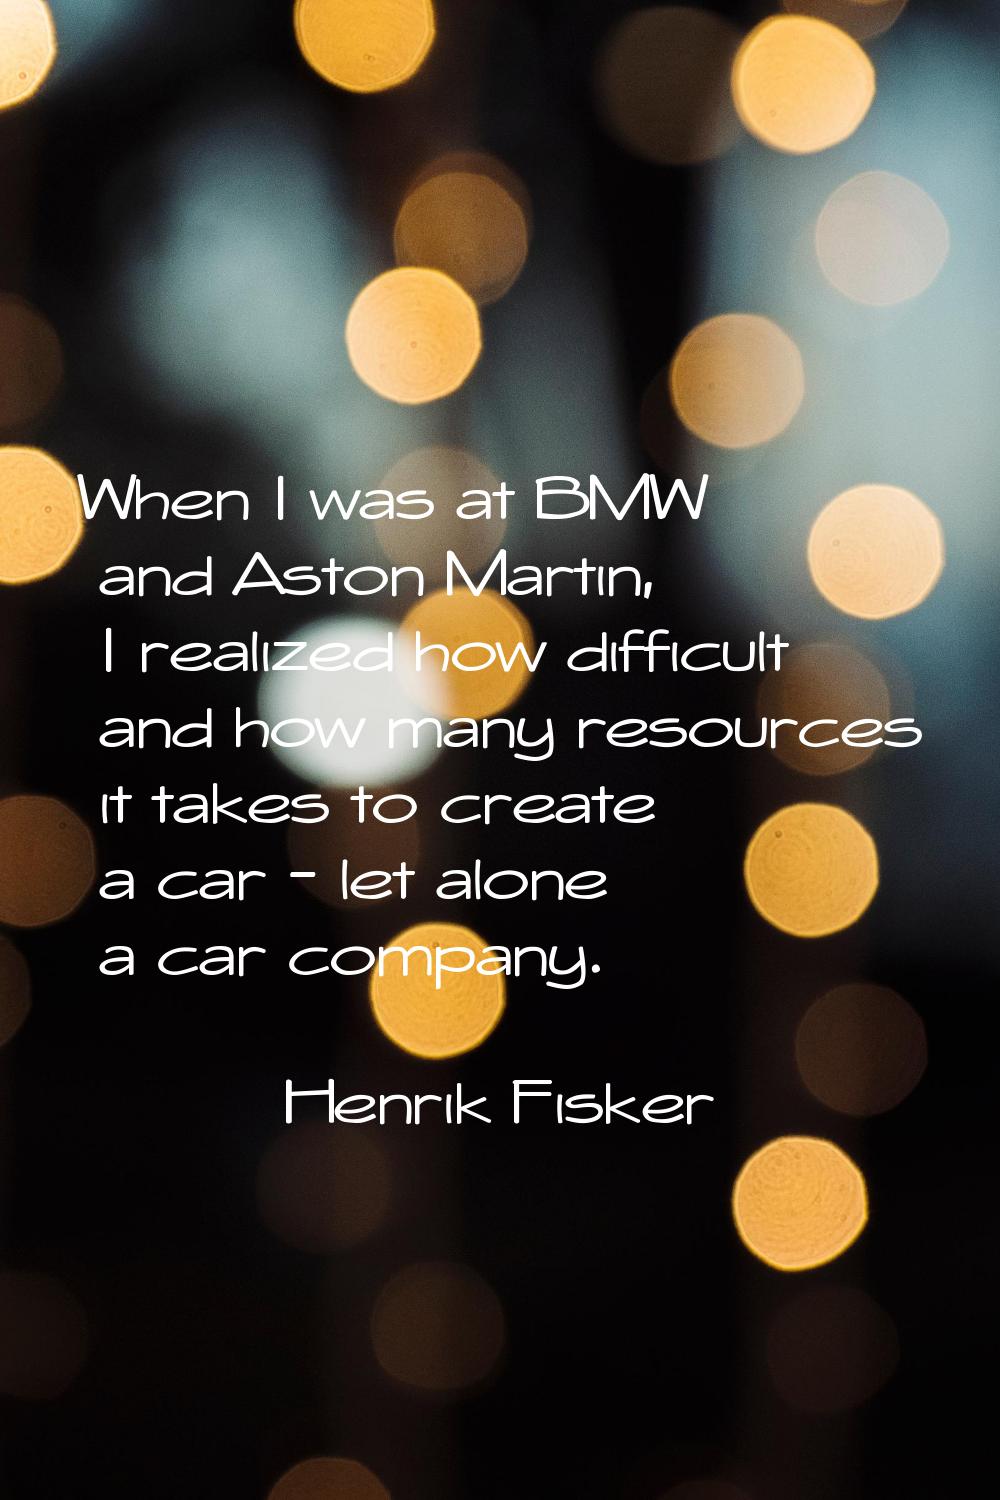 When I was at BMW and Aston Martin, I realized how difficult and how many resources it takes to cre